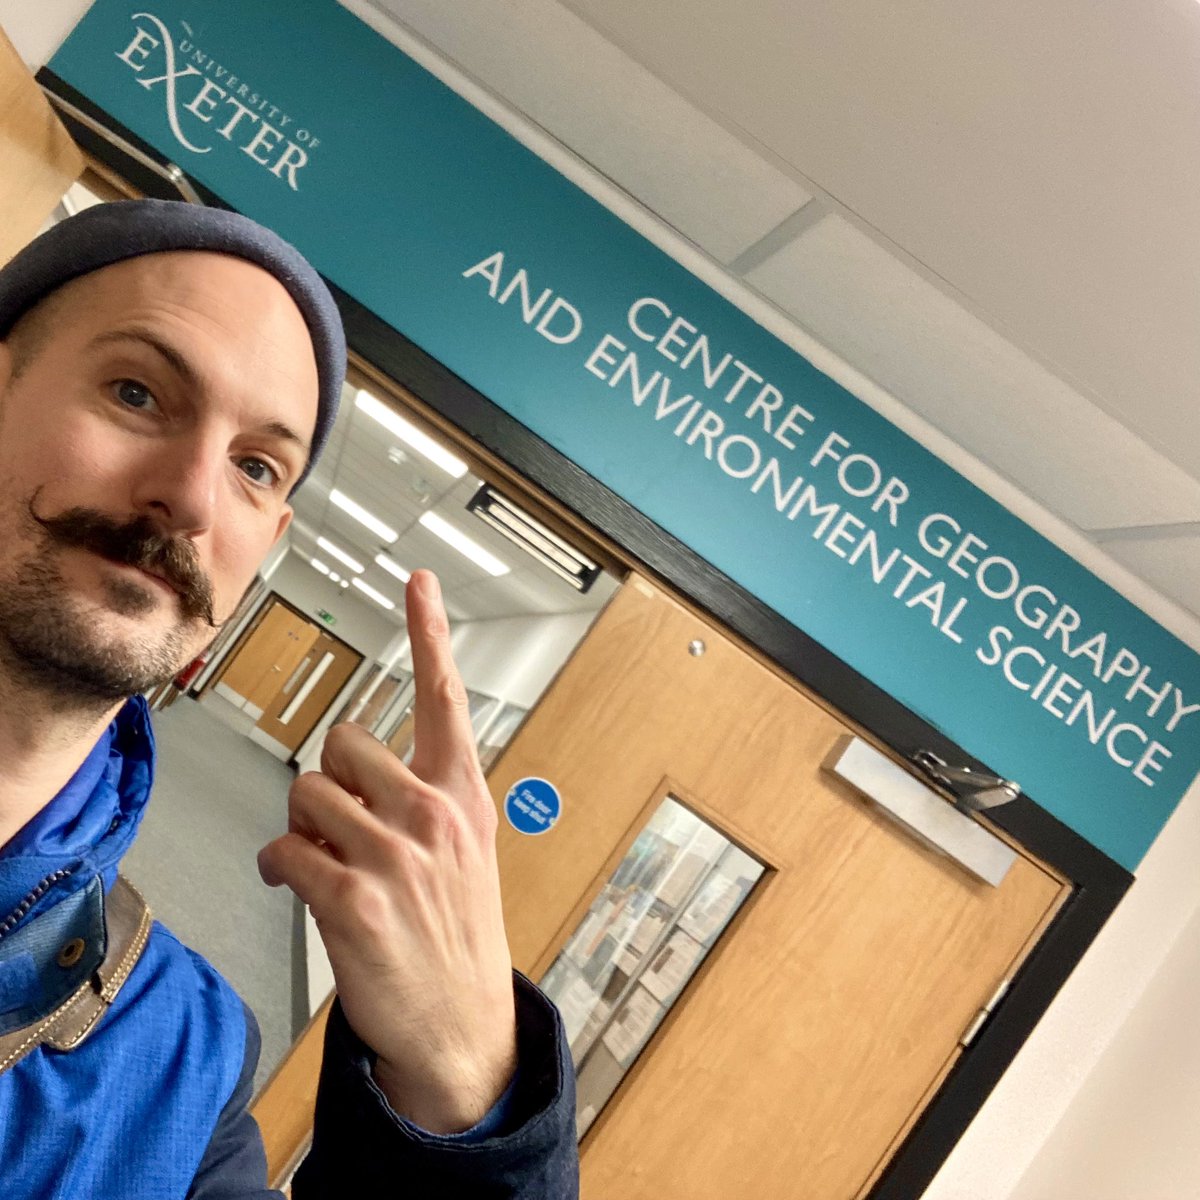 Happy new year everyone! 🌞🌍 Kicking off the year with a new position: Teaching Fellow in Oceanography at @UoExeterCGES at @UniExeCornwall! 👨‍🏫🌊 Now I’m based in Cornwall, I’d love to connect with West Country ocean peeps! Who should I be saying hi to? #NewYearNewBeginnings